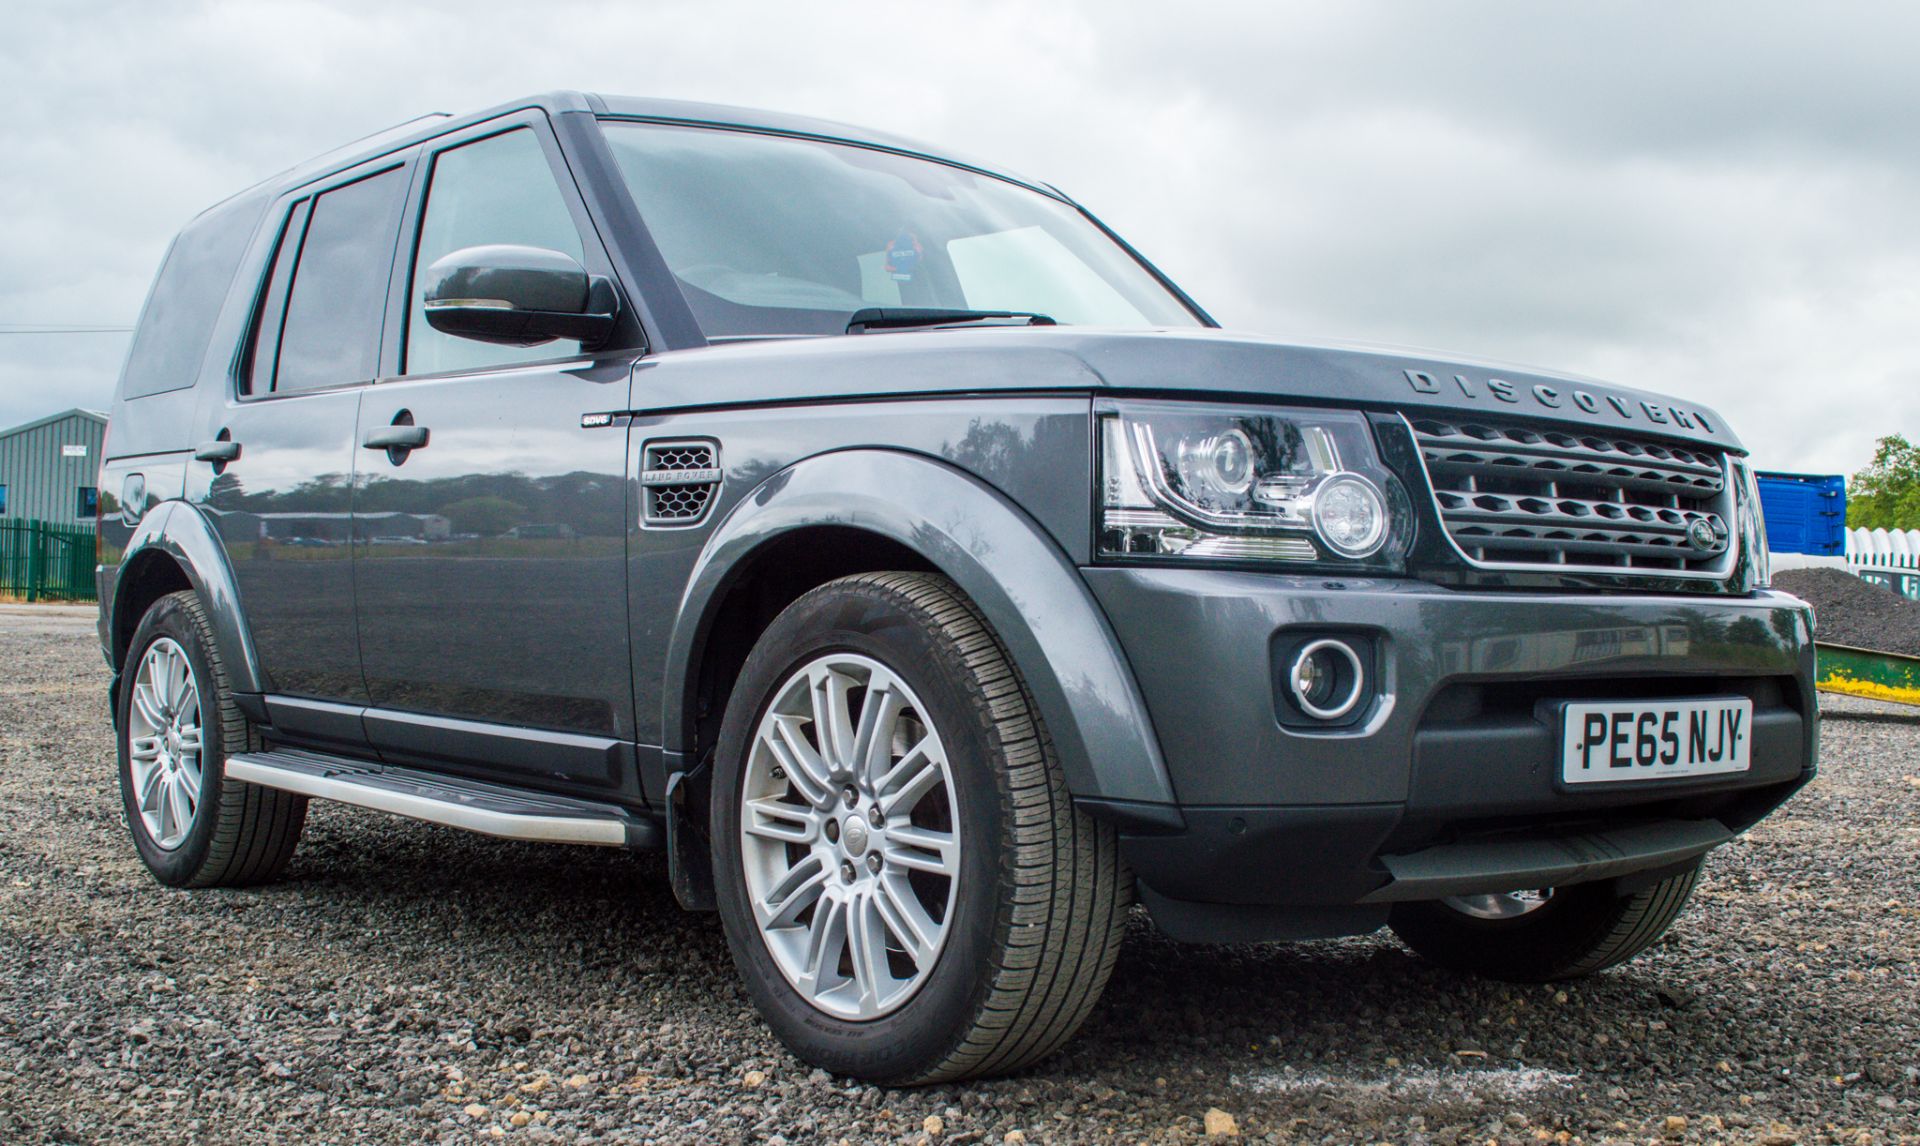 Land Rover Discovery 4 SE 3.0 TDV6 Commercial 4 wheel drive utility vehicle  Reg No: PE 65 NJY  Date - Image 2 of 23